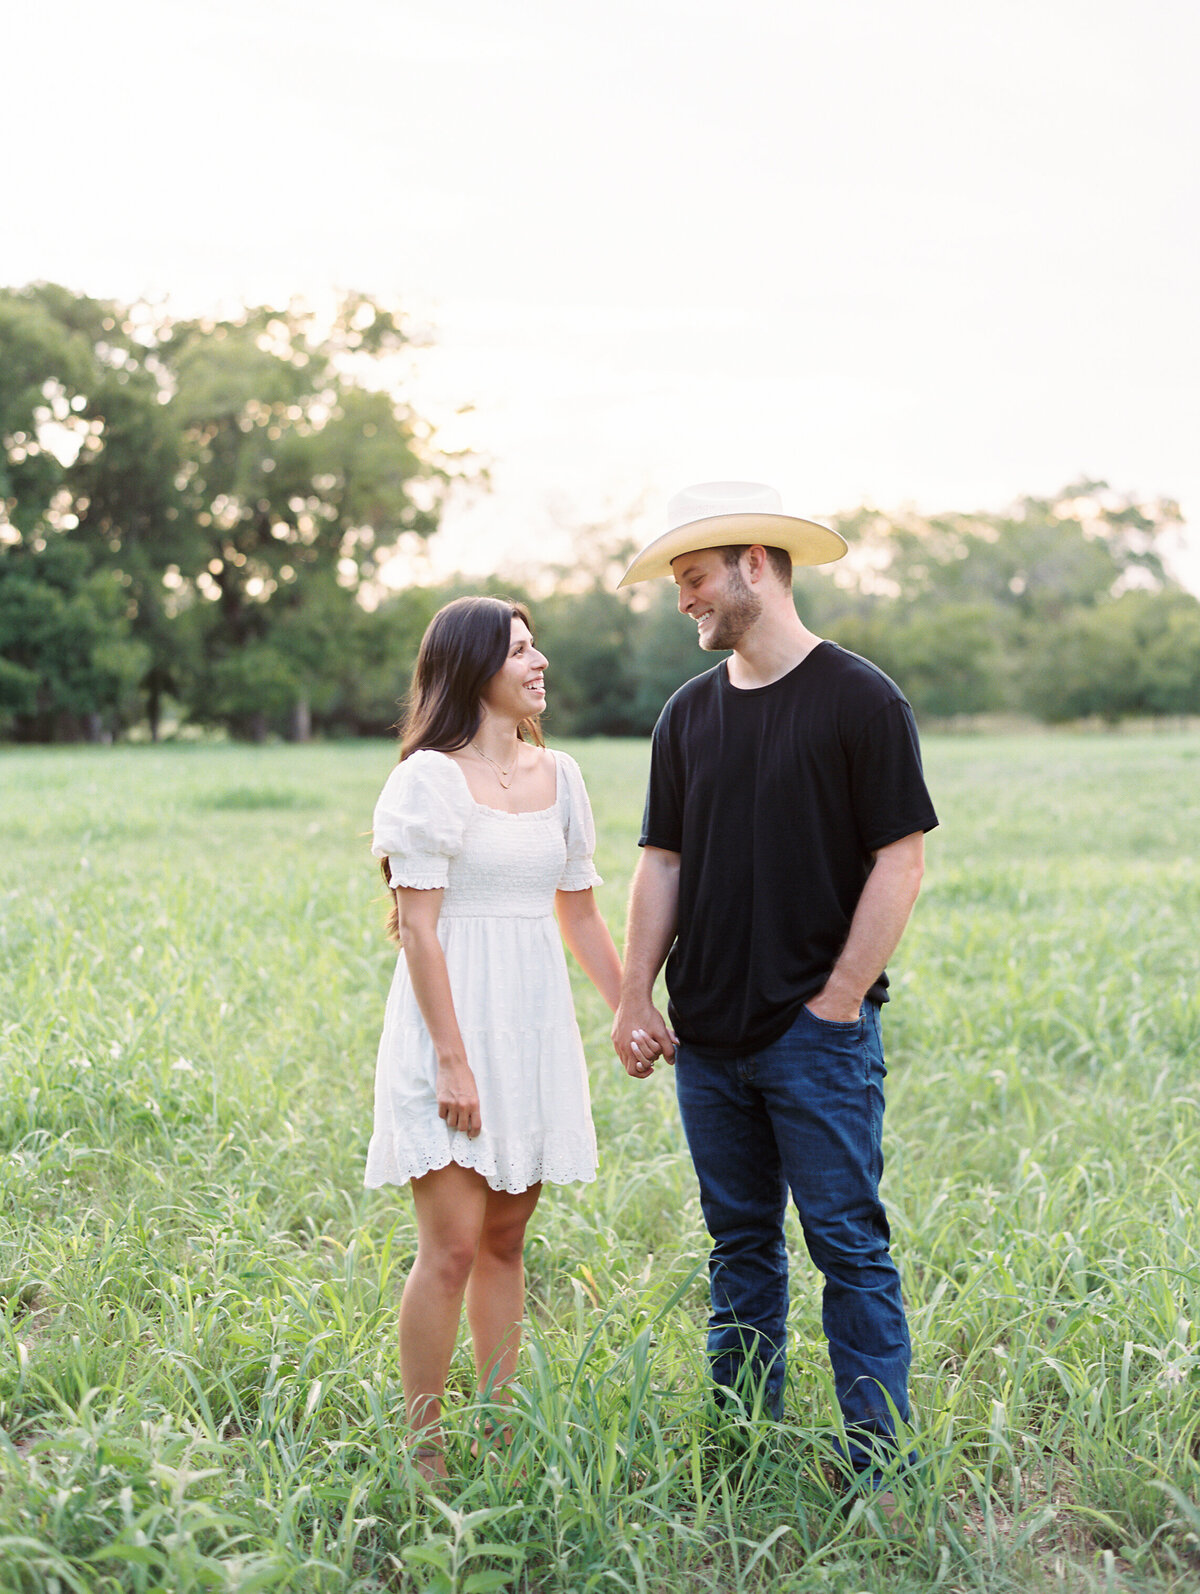 Woman in a white dress holding hands with a man in a black shirt and cowboy hat